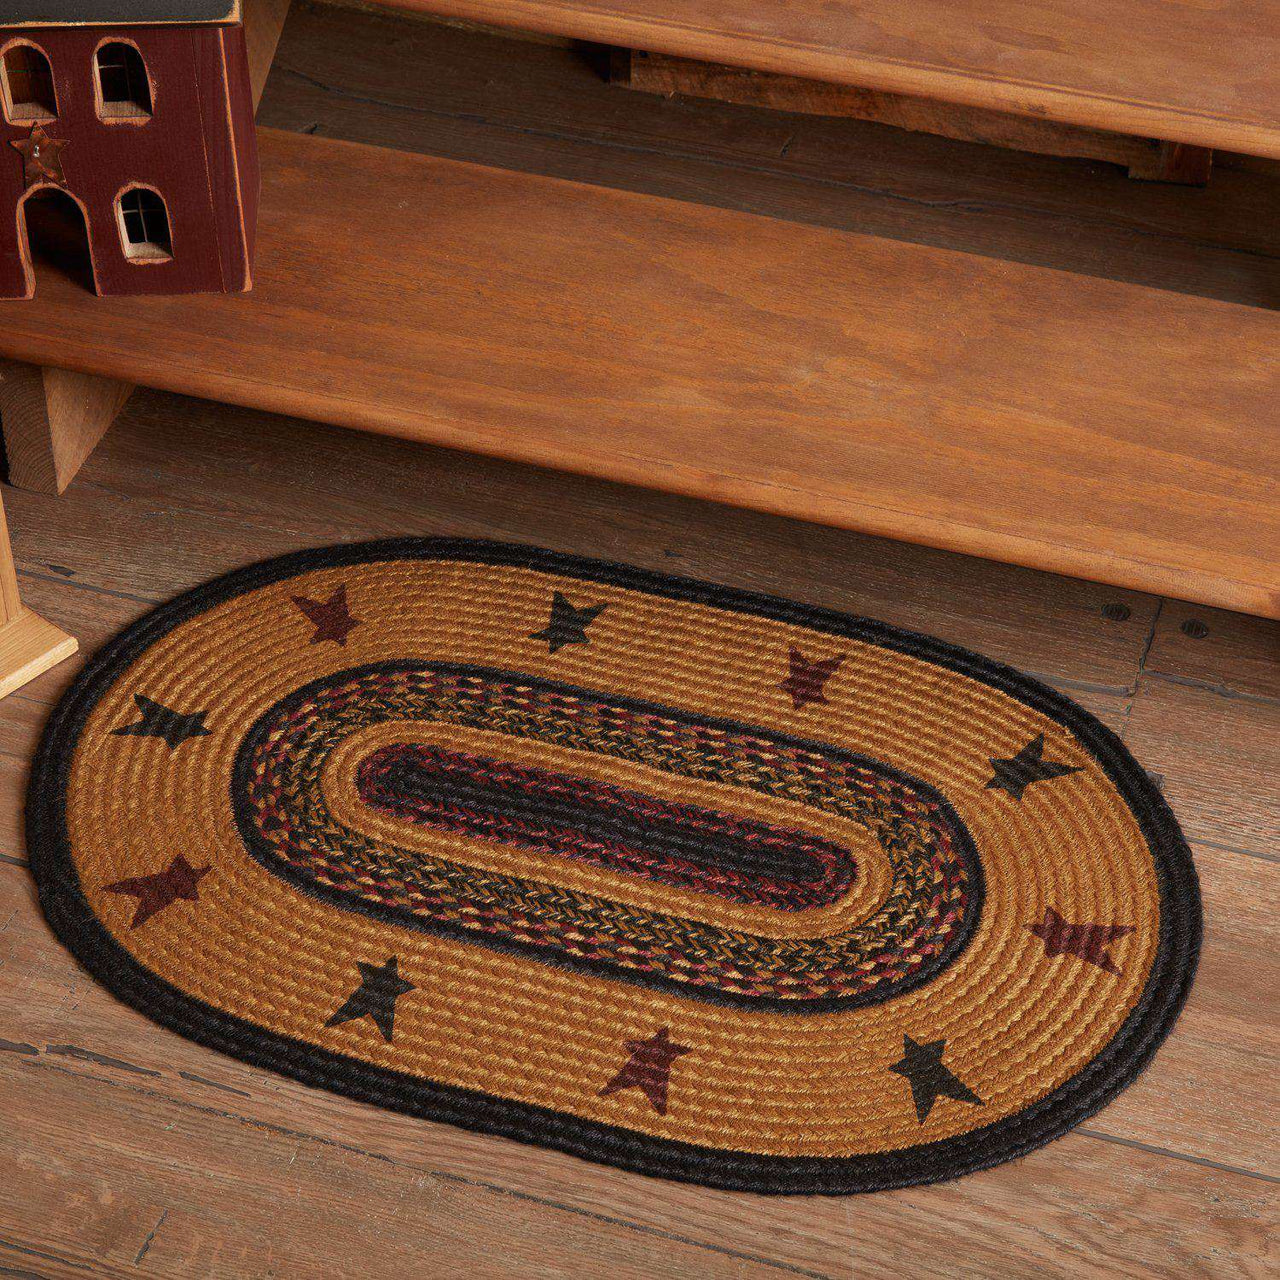 Heritage Farms Star Jute Braided Rug Oval VHC Brands rugs VHC Brands 